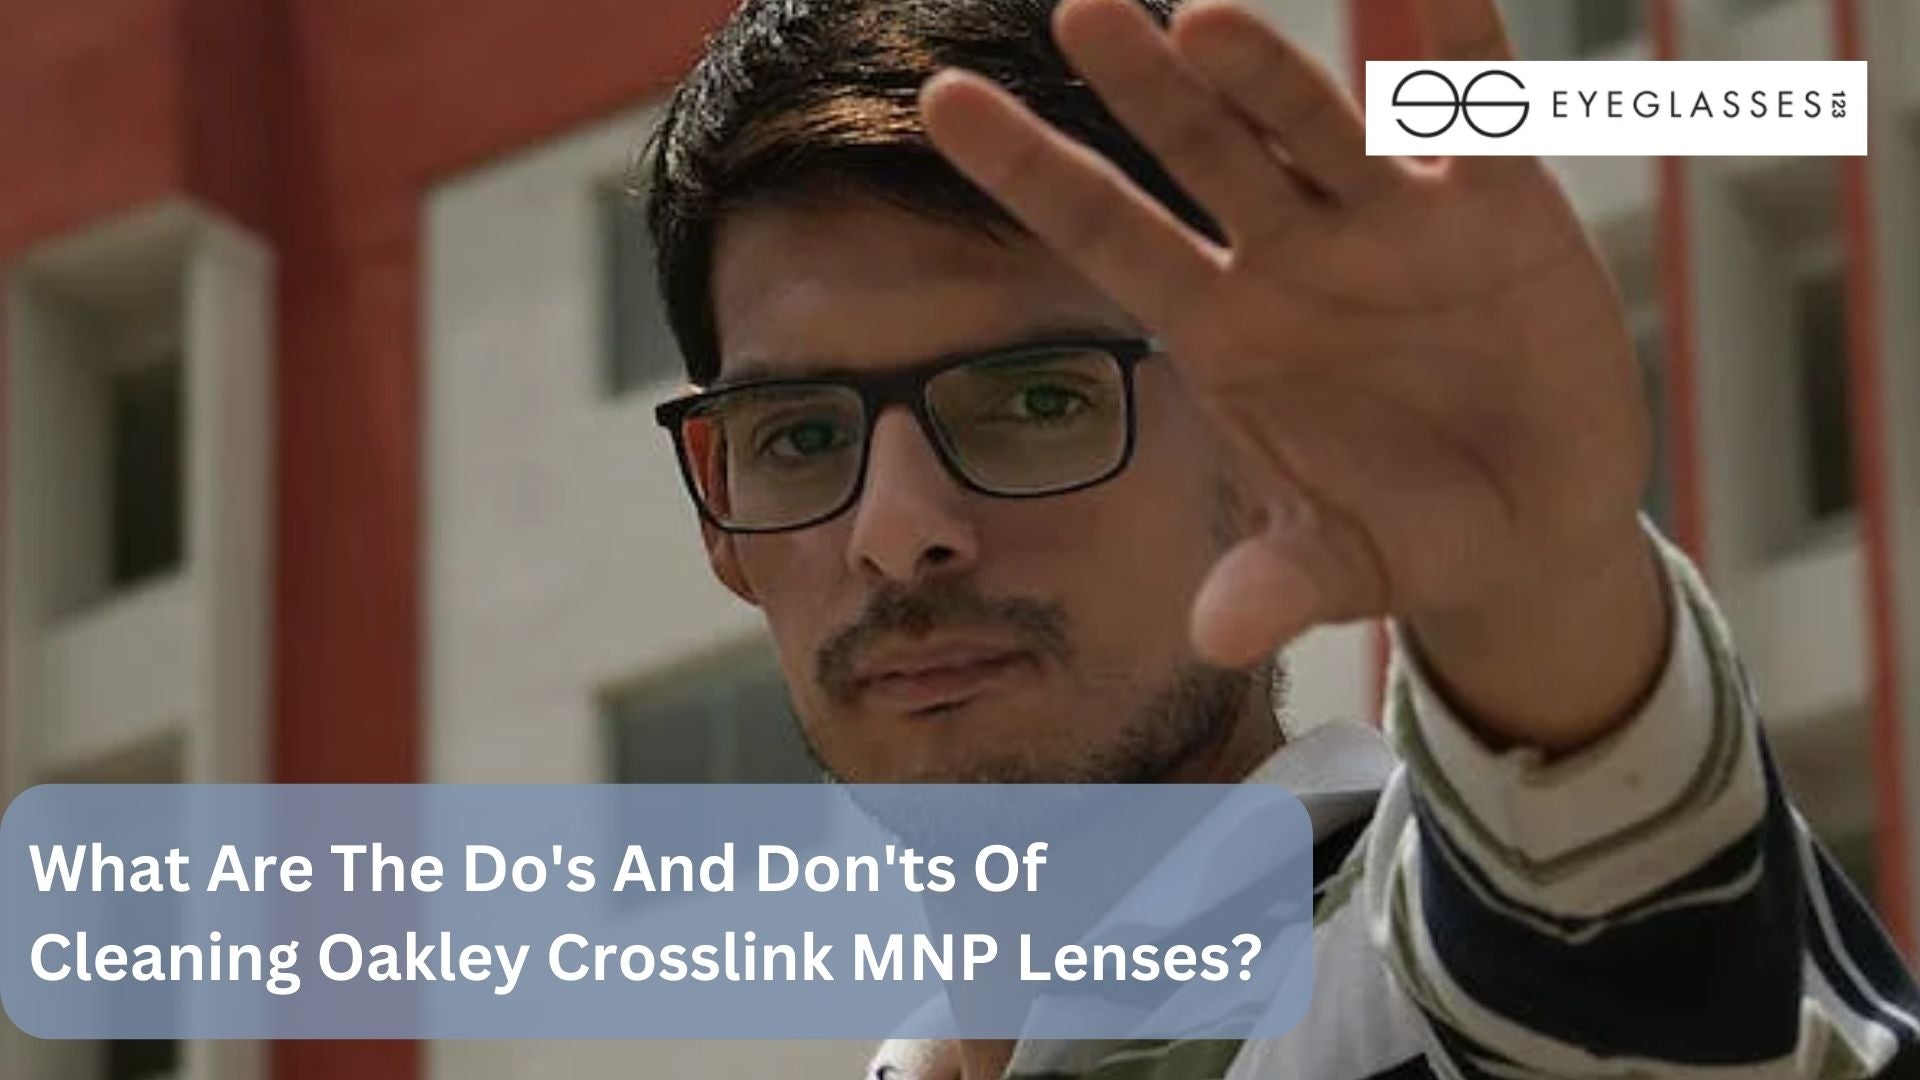 What Are The Do's And Don'ts Of Cleaning Oakley Crosslink MNP Lenses?